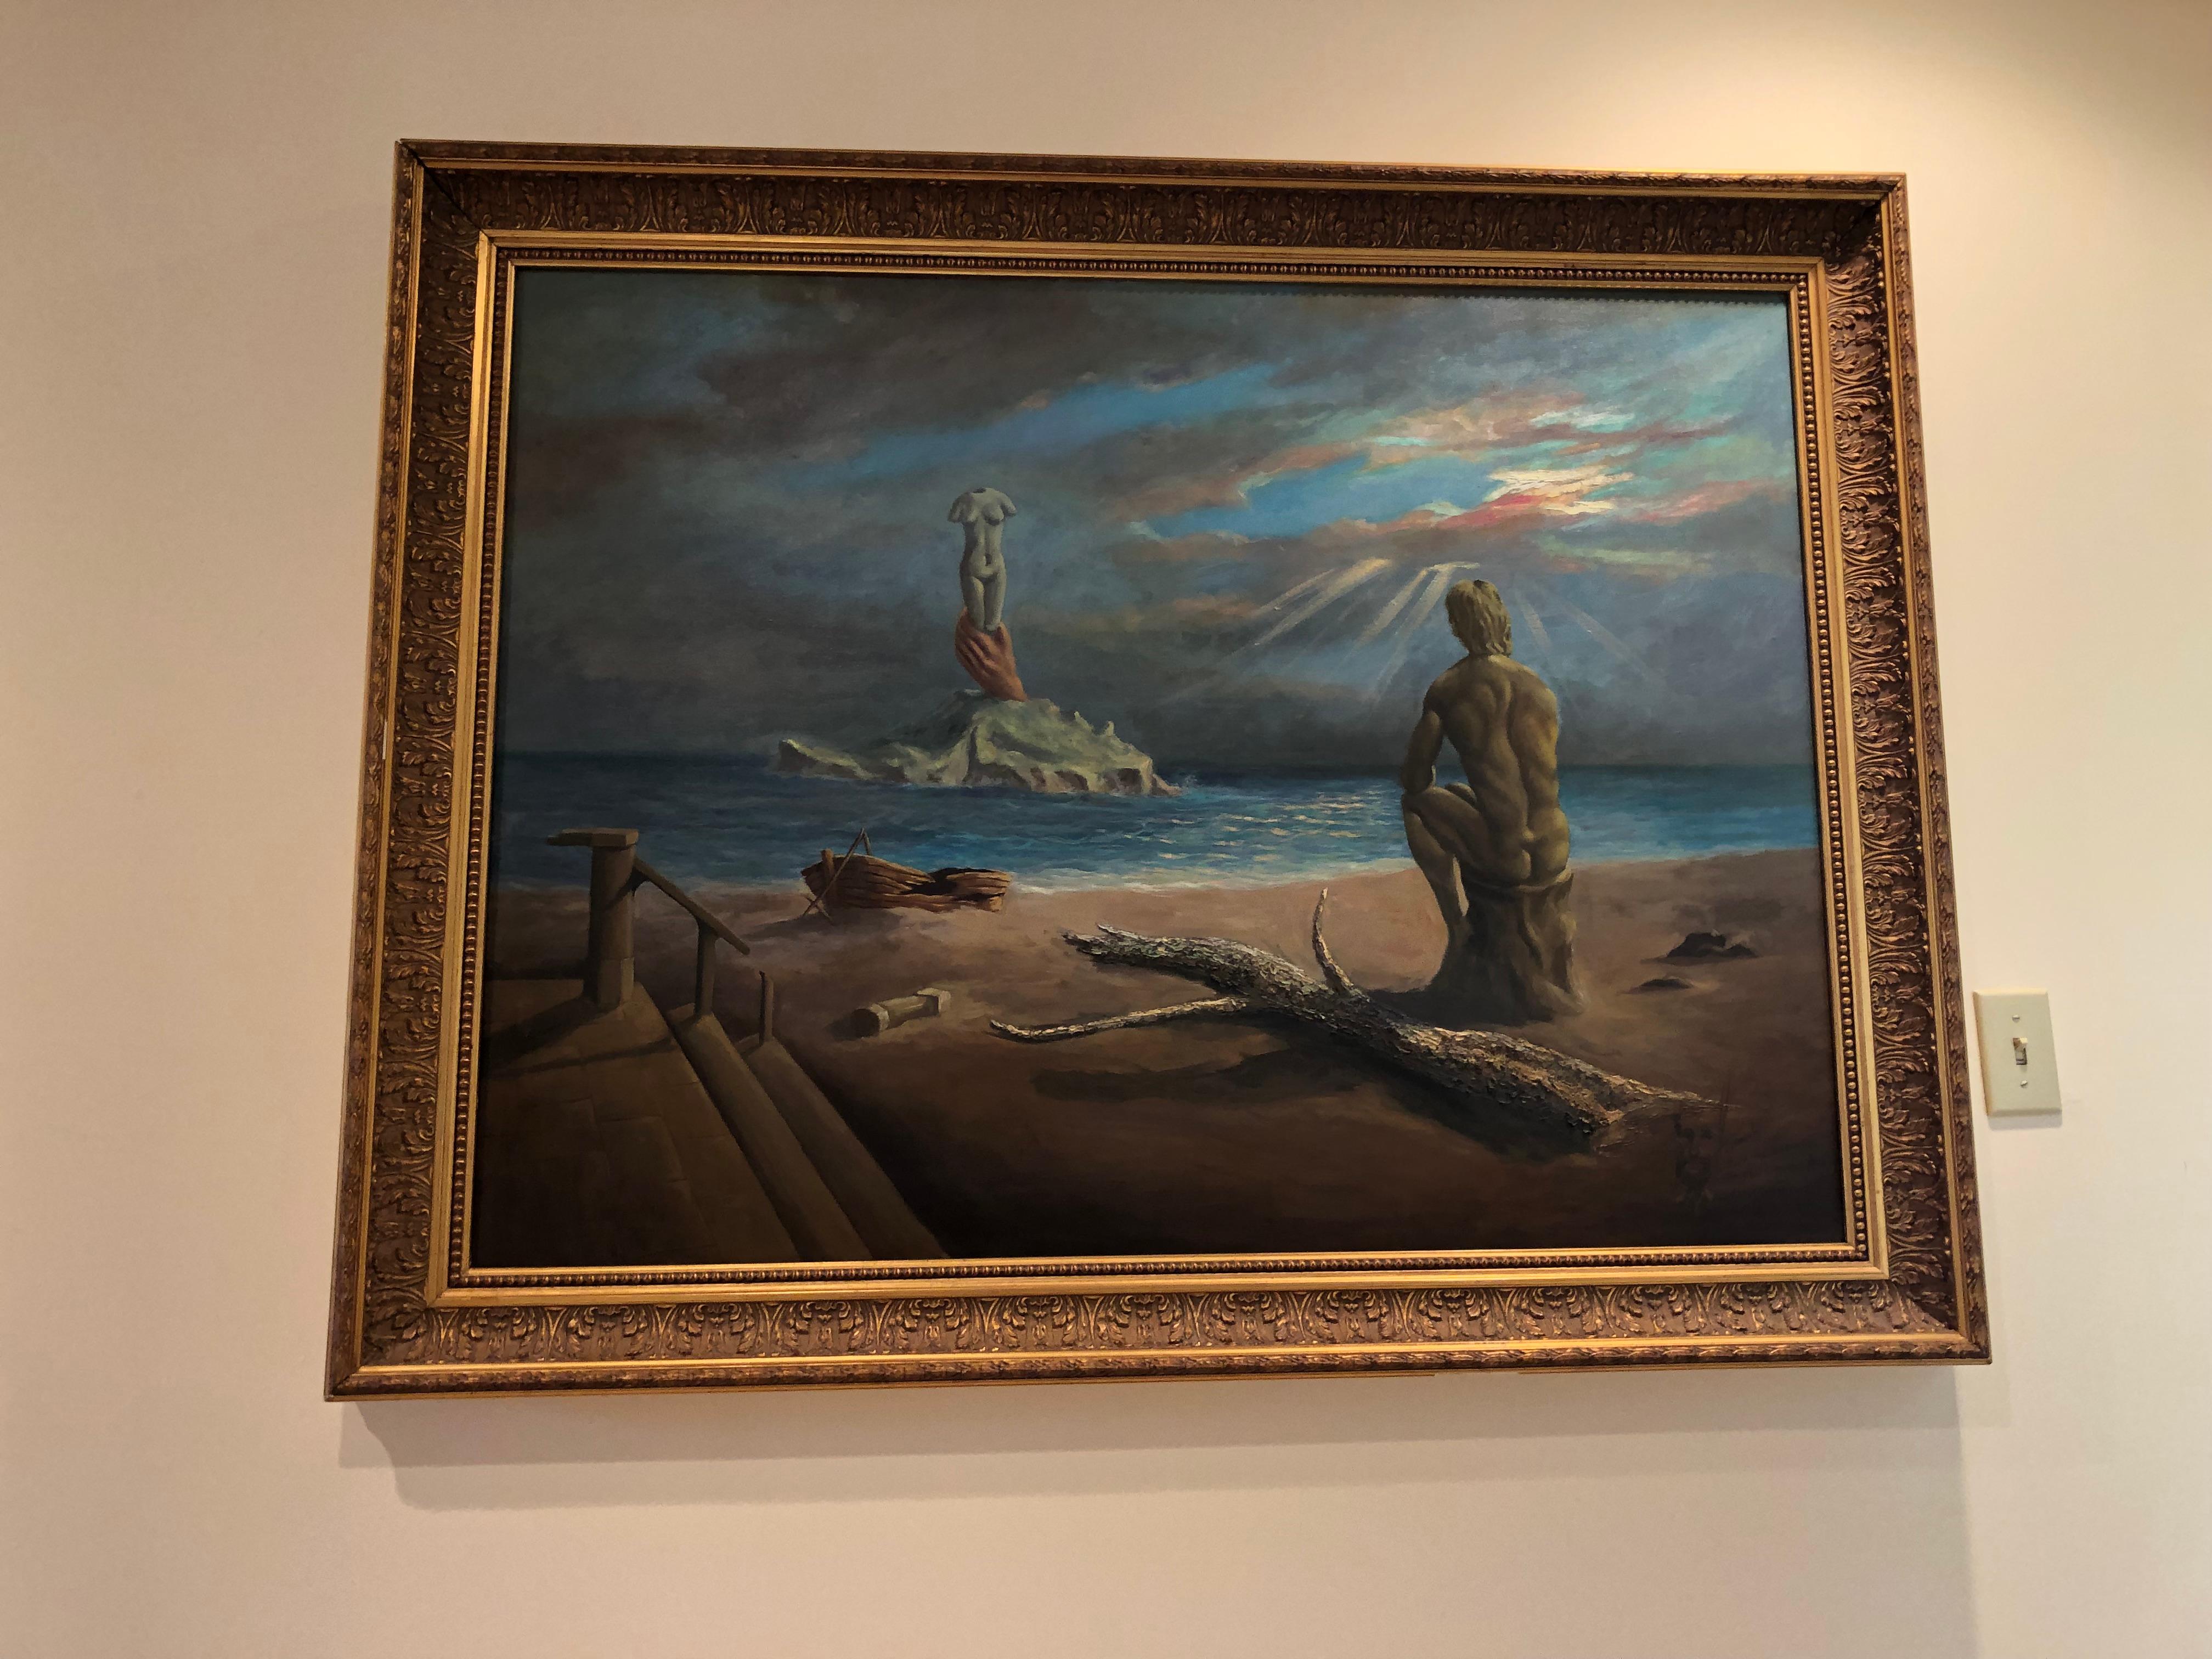 Surrealist Salvador Dali style oil on canvas signed Hernandez. The subject matter is of a man sitting on a log looking out into the ocean to a female torso floating on a hand holding it above the water.
Signed on the back with a portrait of the